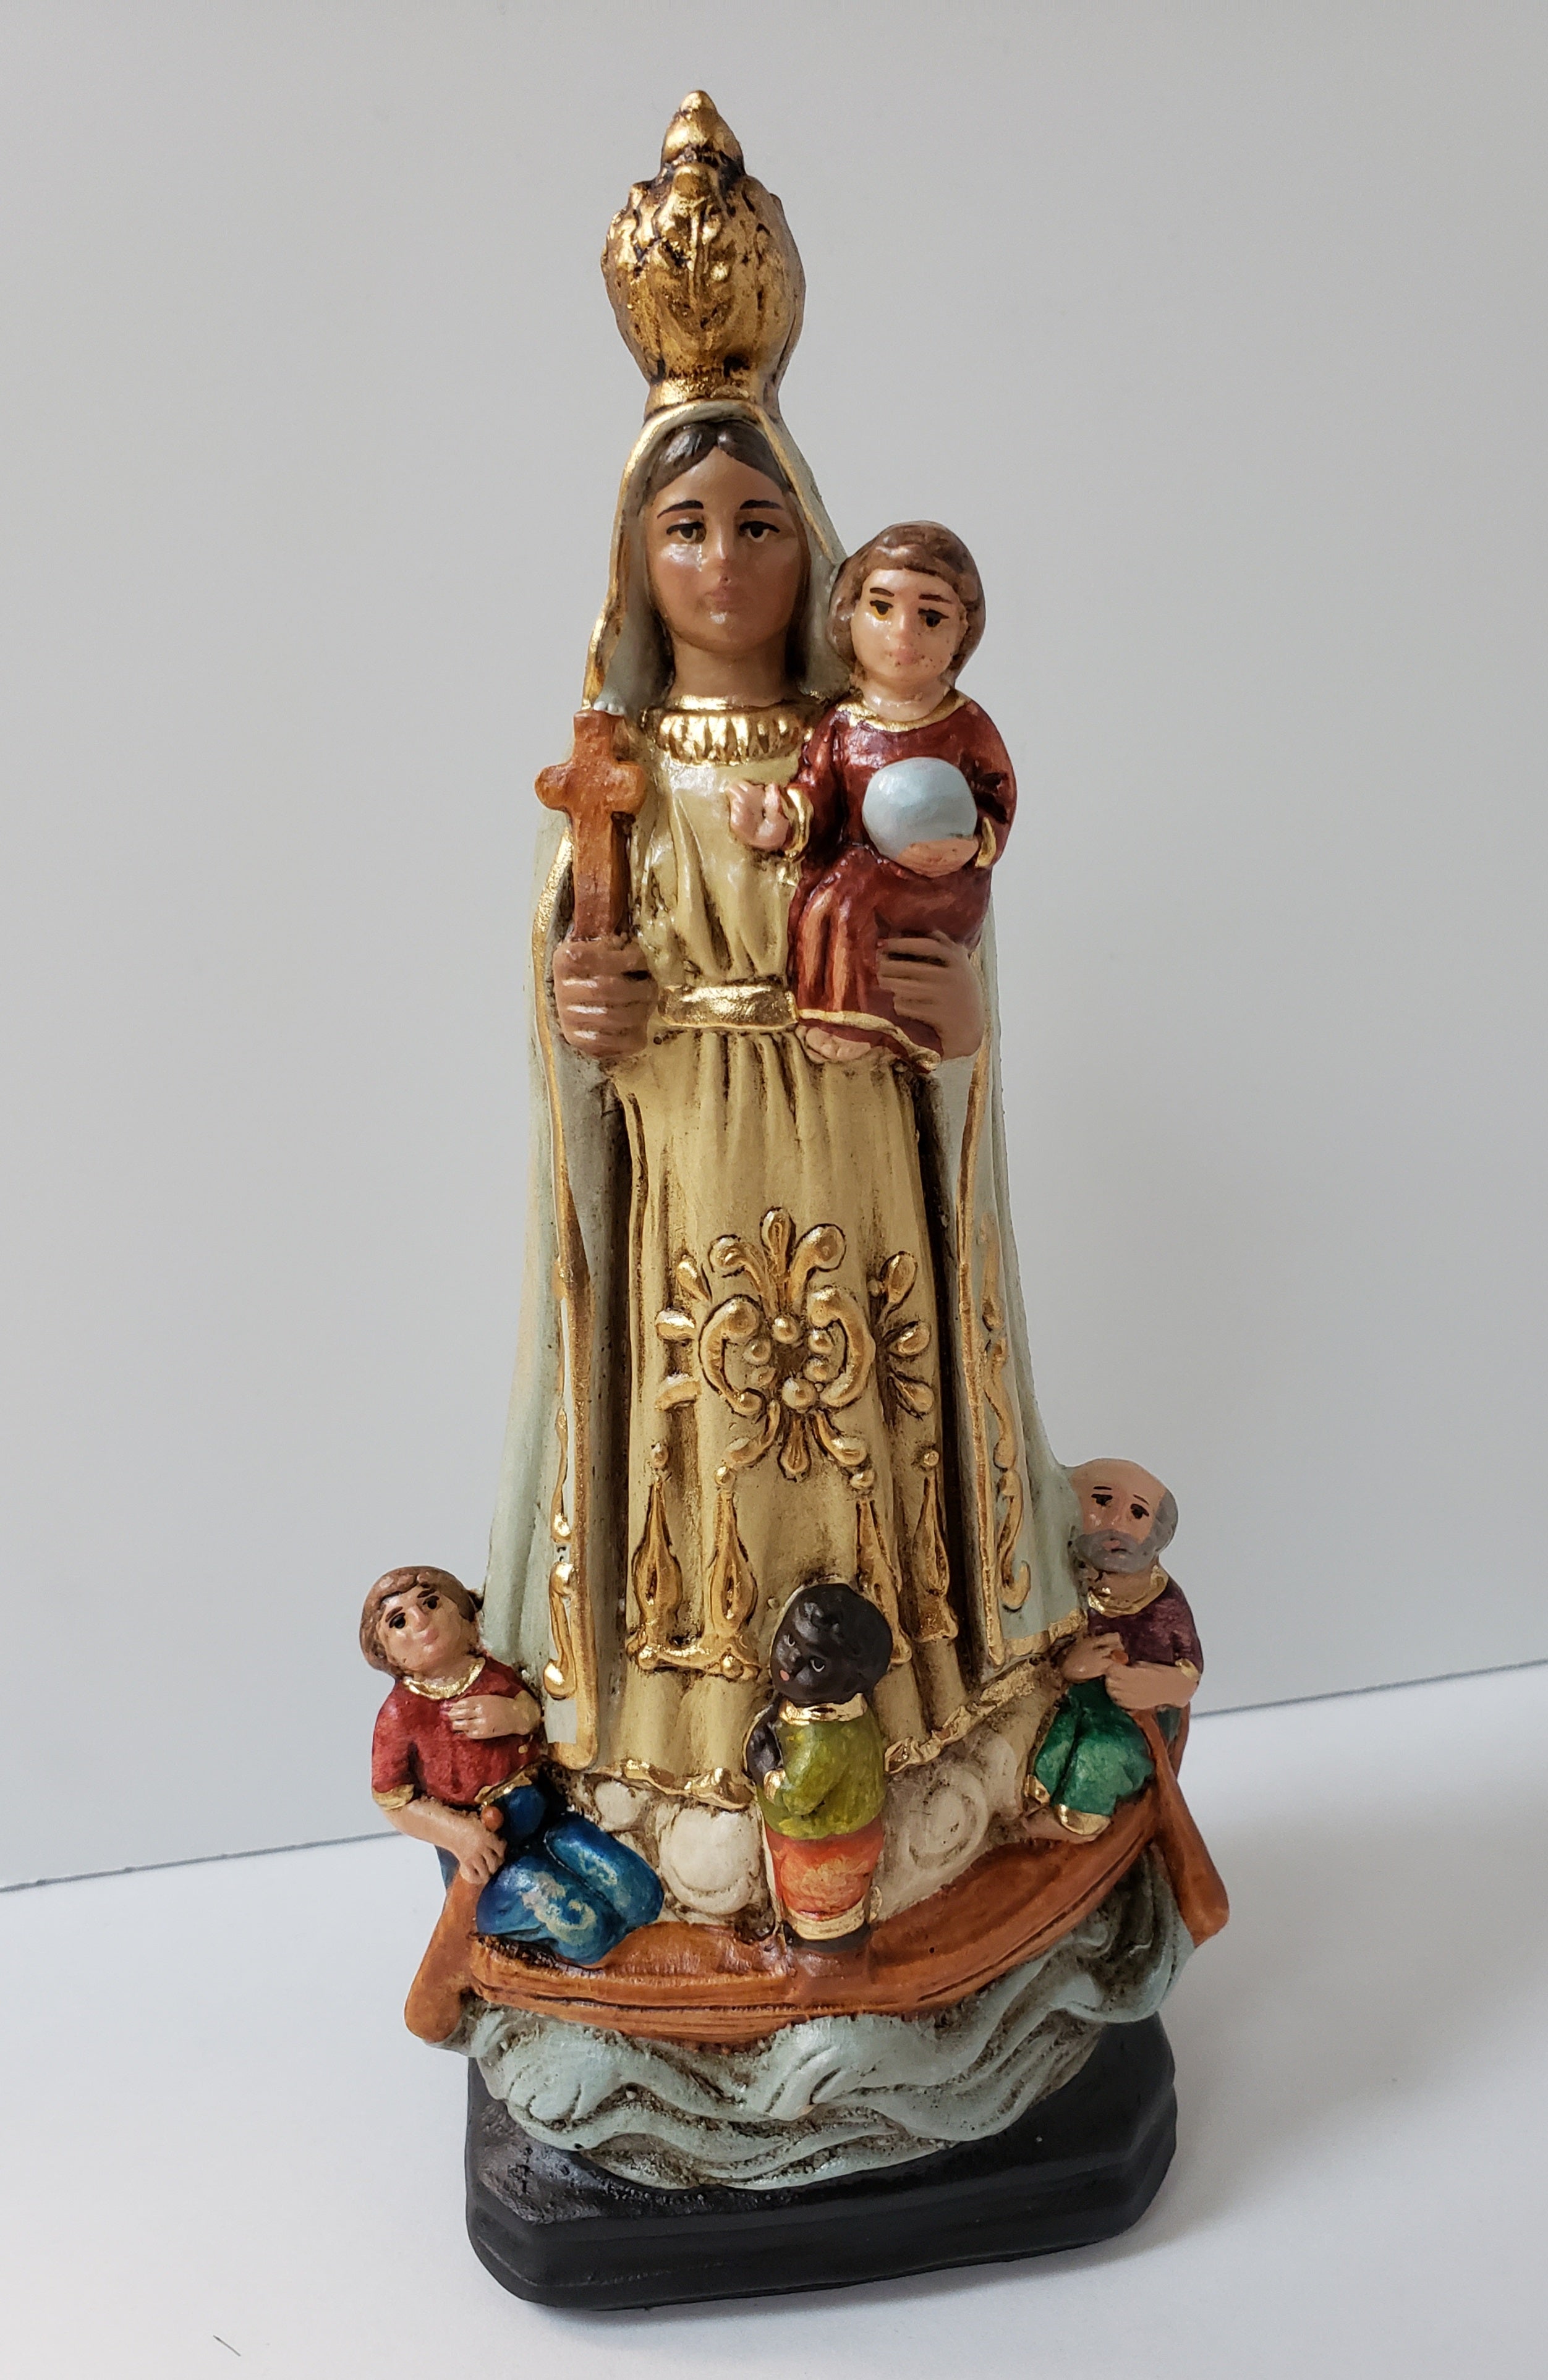 8" Our Lady of Charity. Made in Colombia